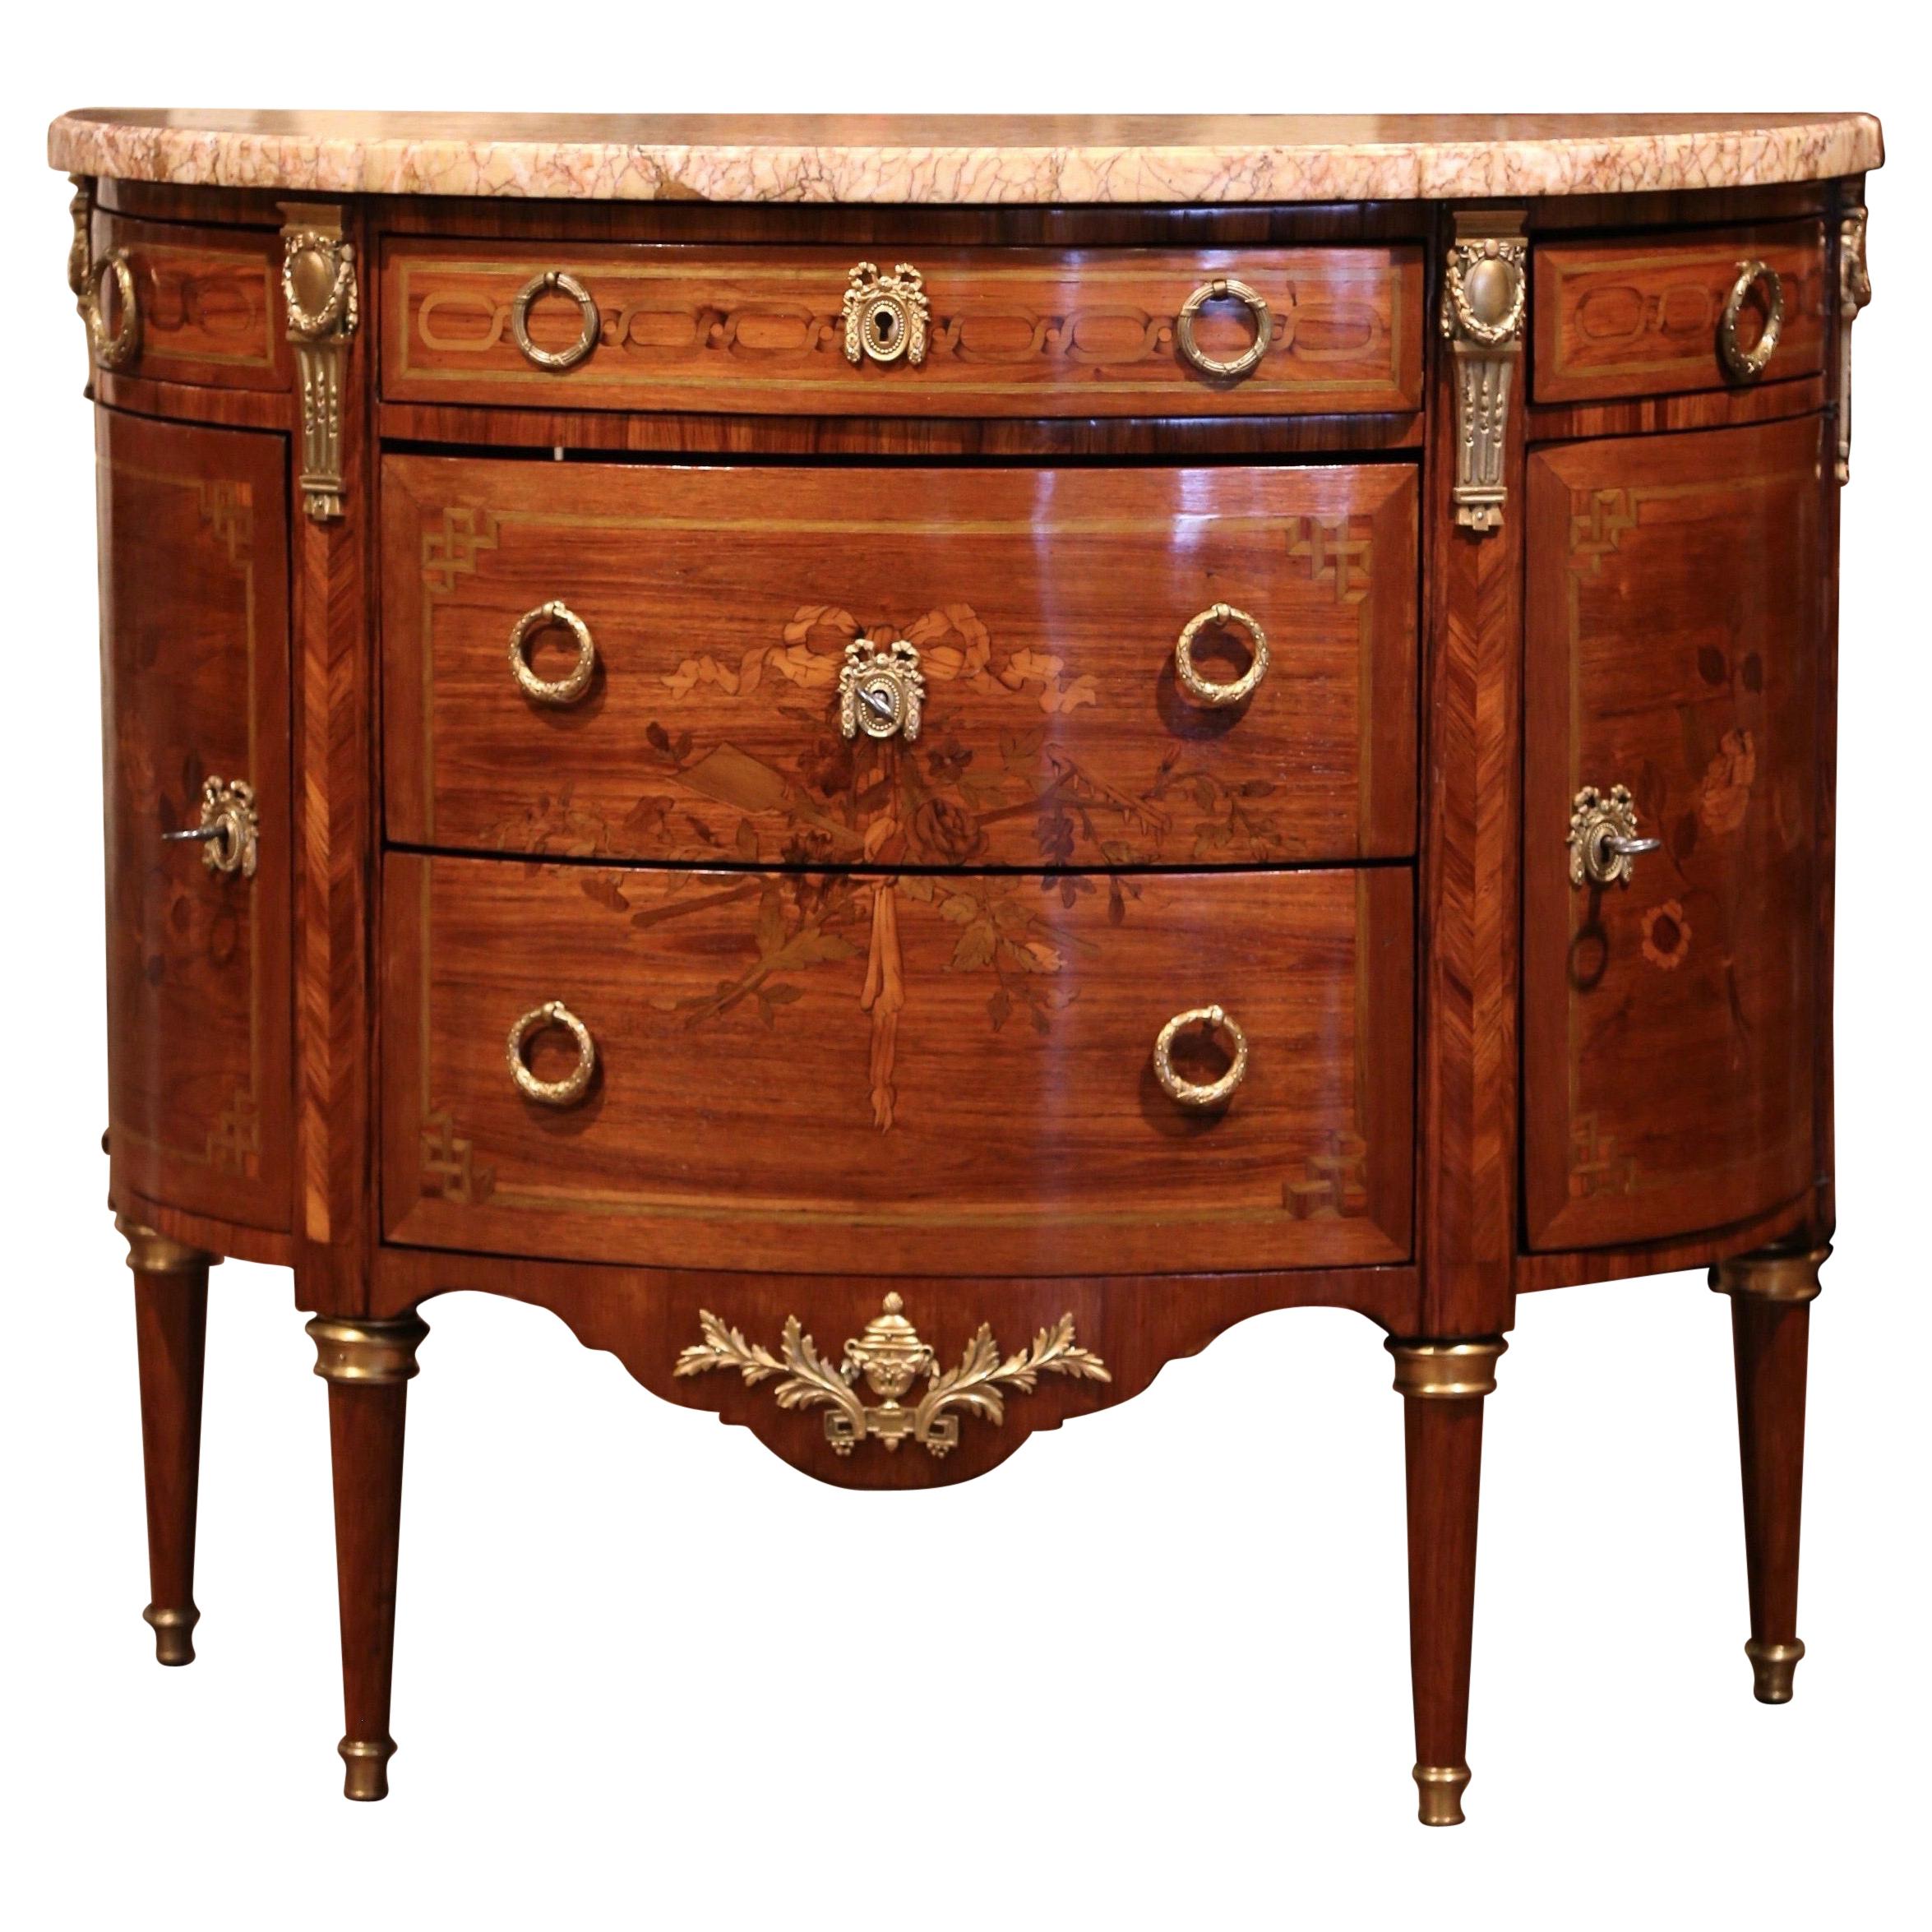 19th Century French Bombe Demilune Marquetry and Bronze Commode with Marble Top